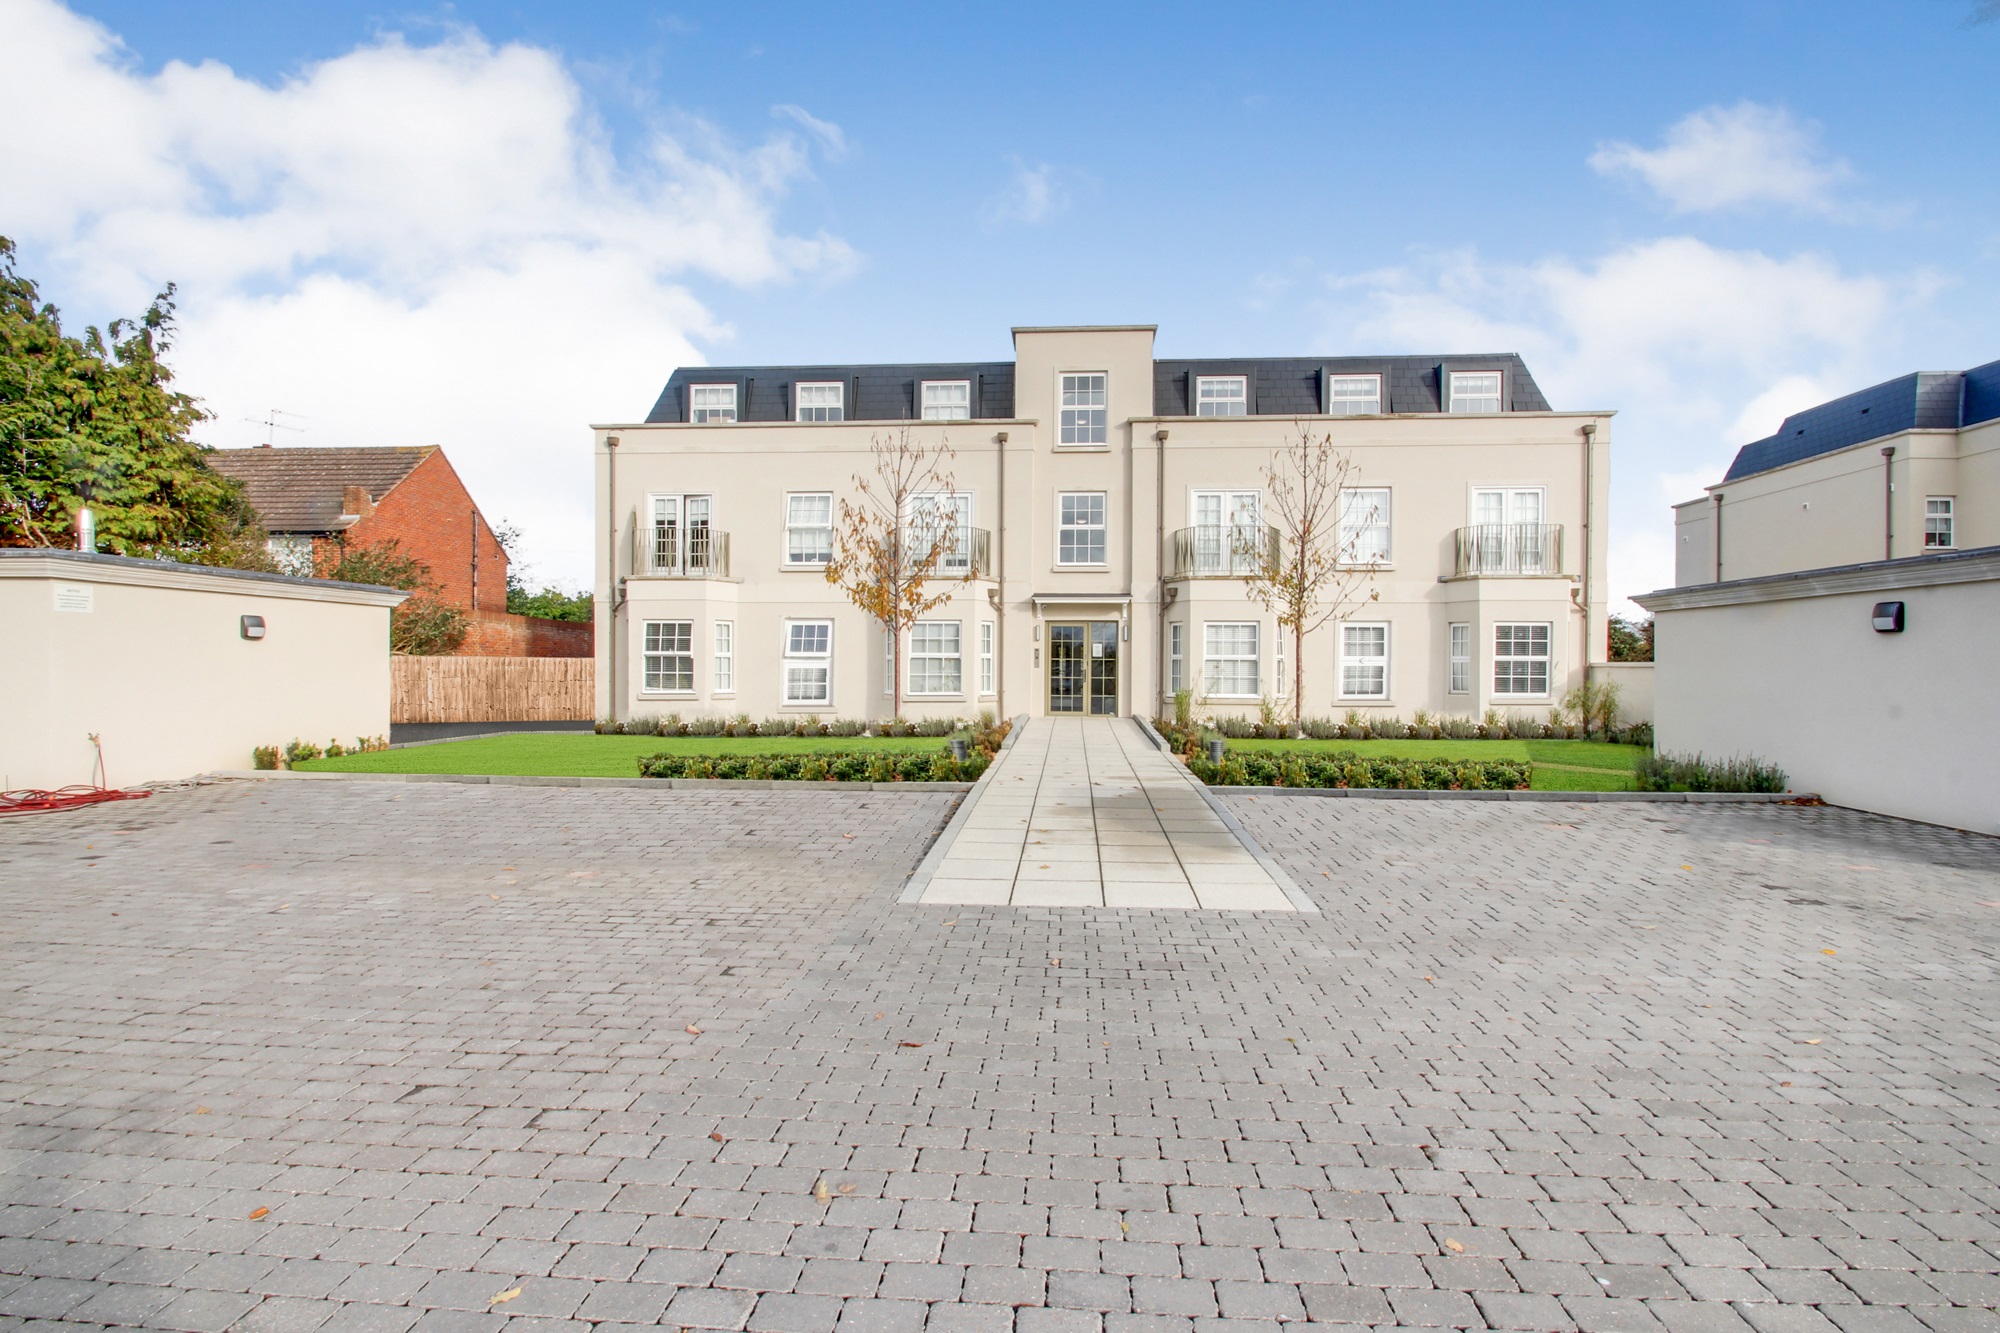 <p>A two bedroom GROUND FLOOR apartment in popular sought after location close to Datchet Village. The apartment comprises open plan lounge/ kitchen, en-suite and main bathroom. Benefits include storage and parking. Available end of September. Unfurnished. Gas is an additional £50pcm. <br><br></p>